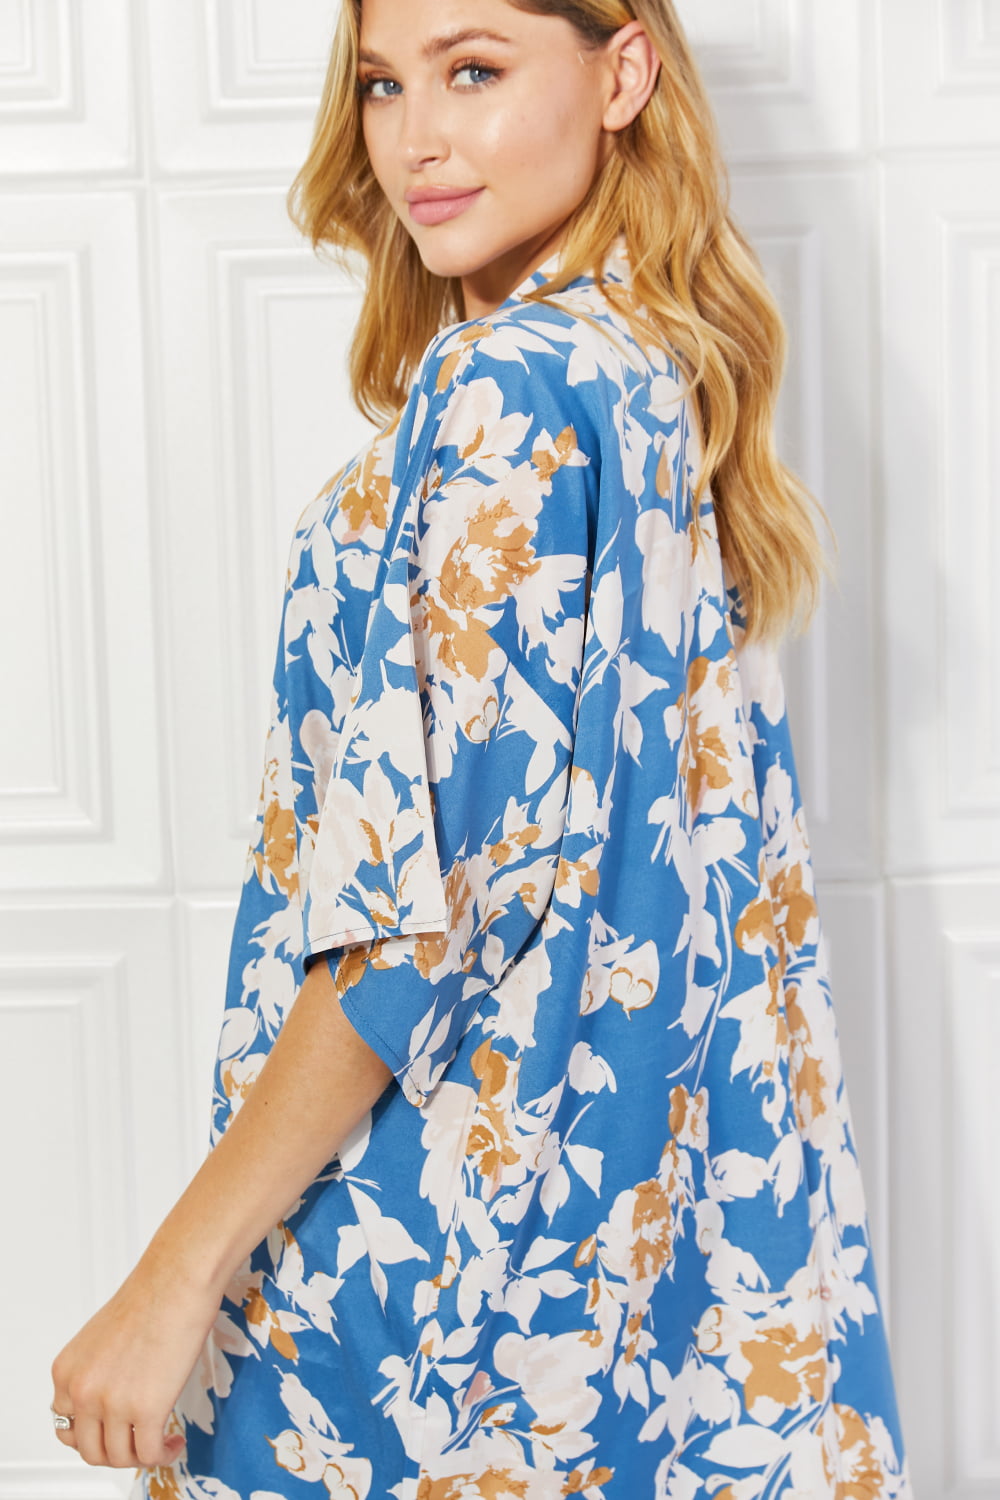 Justin Taylor Time To Grow Floral Kimono in Chambray - nailedmoms